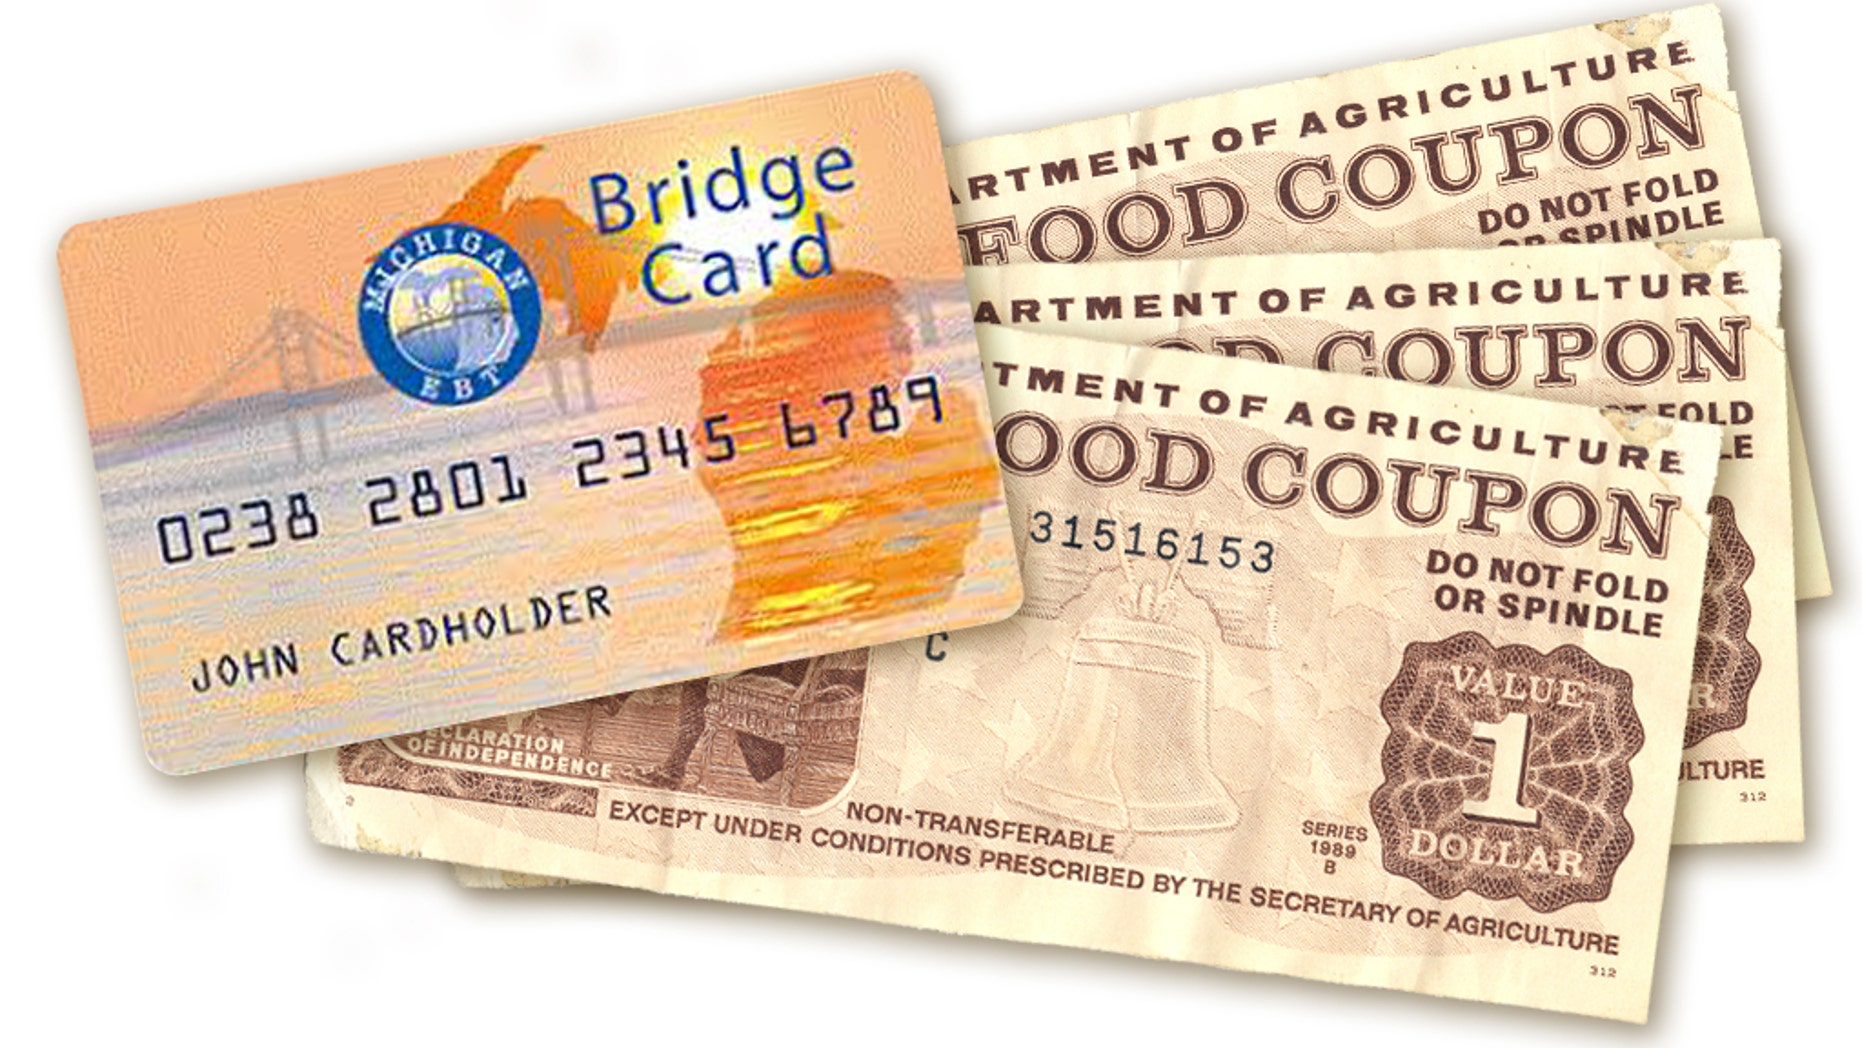 Some recipients of Michigan food stamps will now have to comply with the demands of the job.